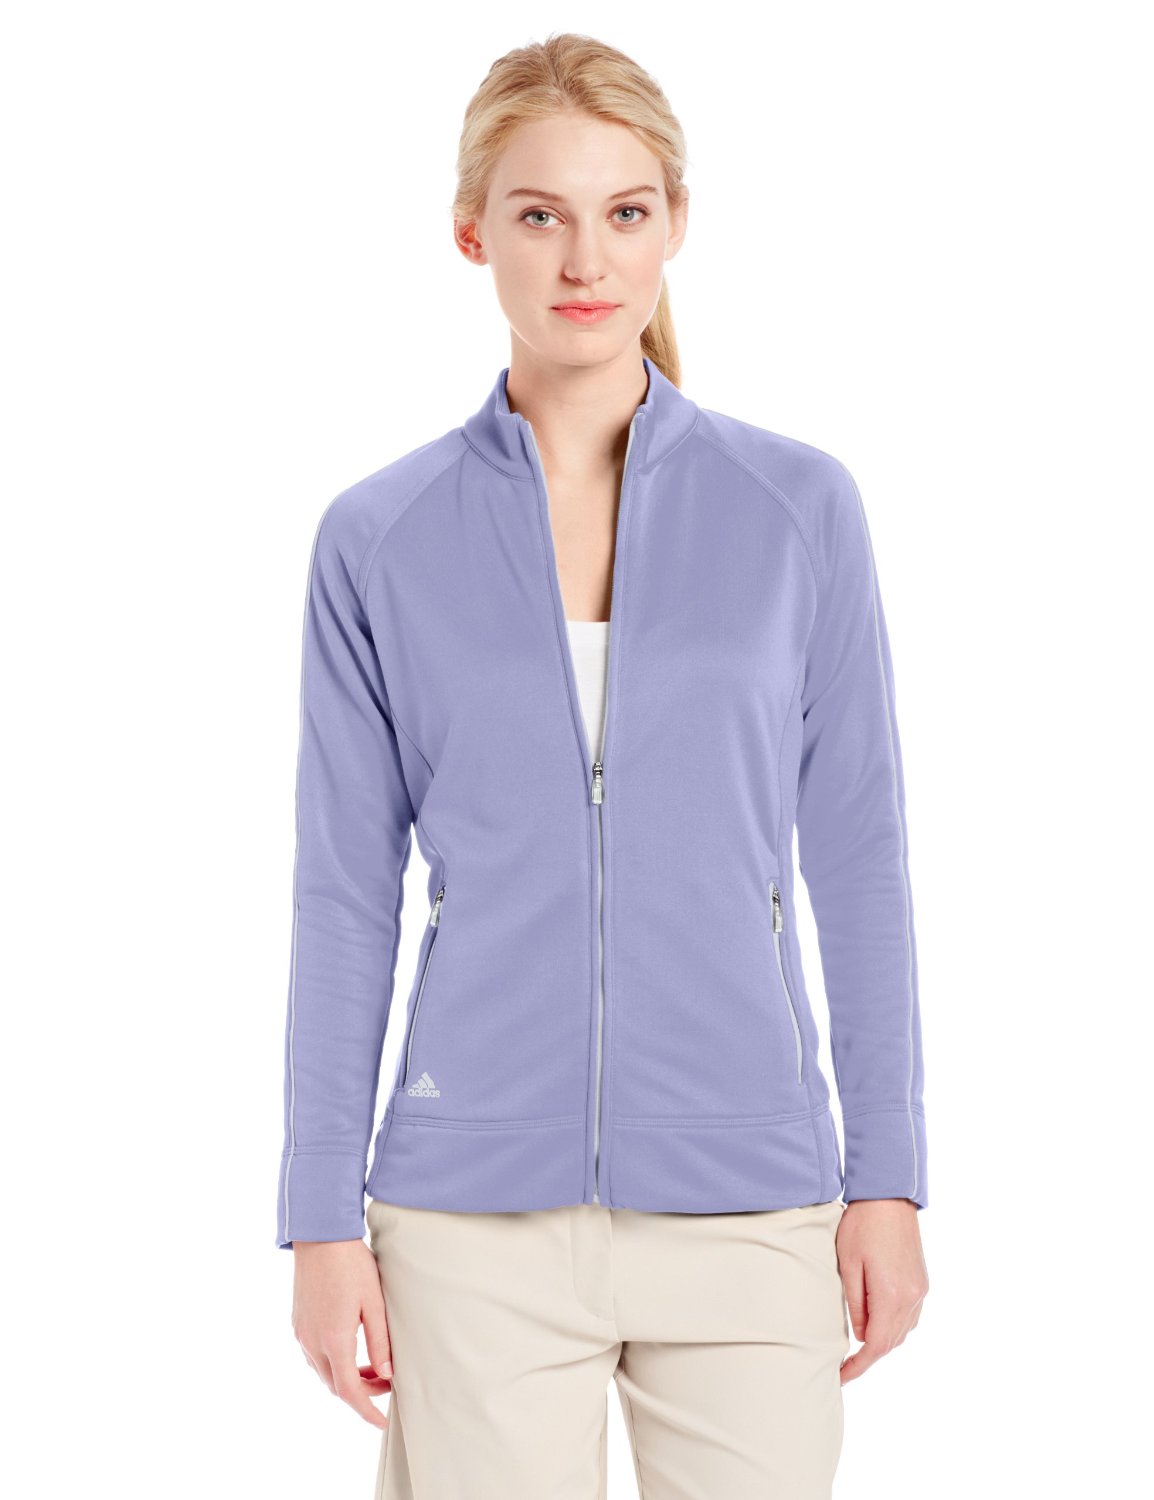 Womens 3-Stripe Piped Golf Jackets